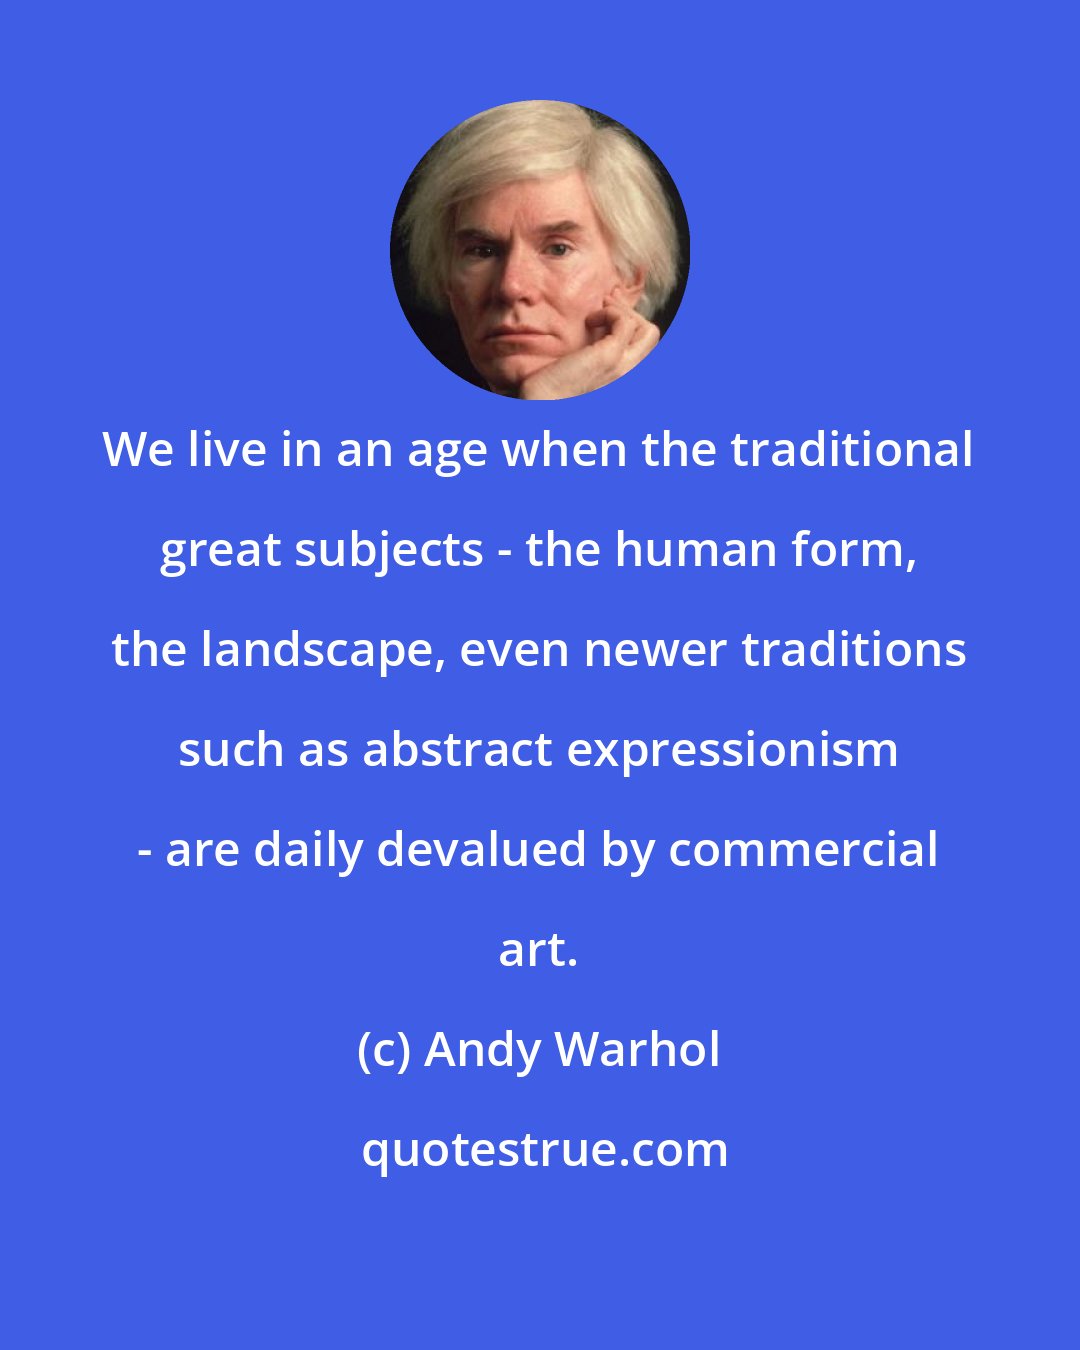 Andy Warhol: We live in an age when the traditional great subjects - the human form, the landscape, even newer traditions such as abstract expressionism - are daily devalued by commercial art.